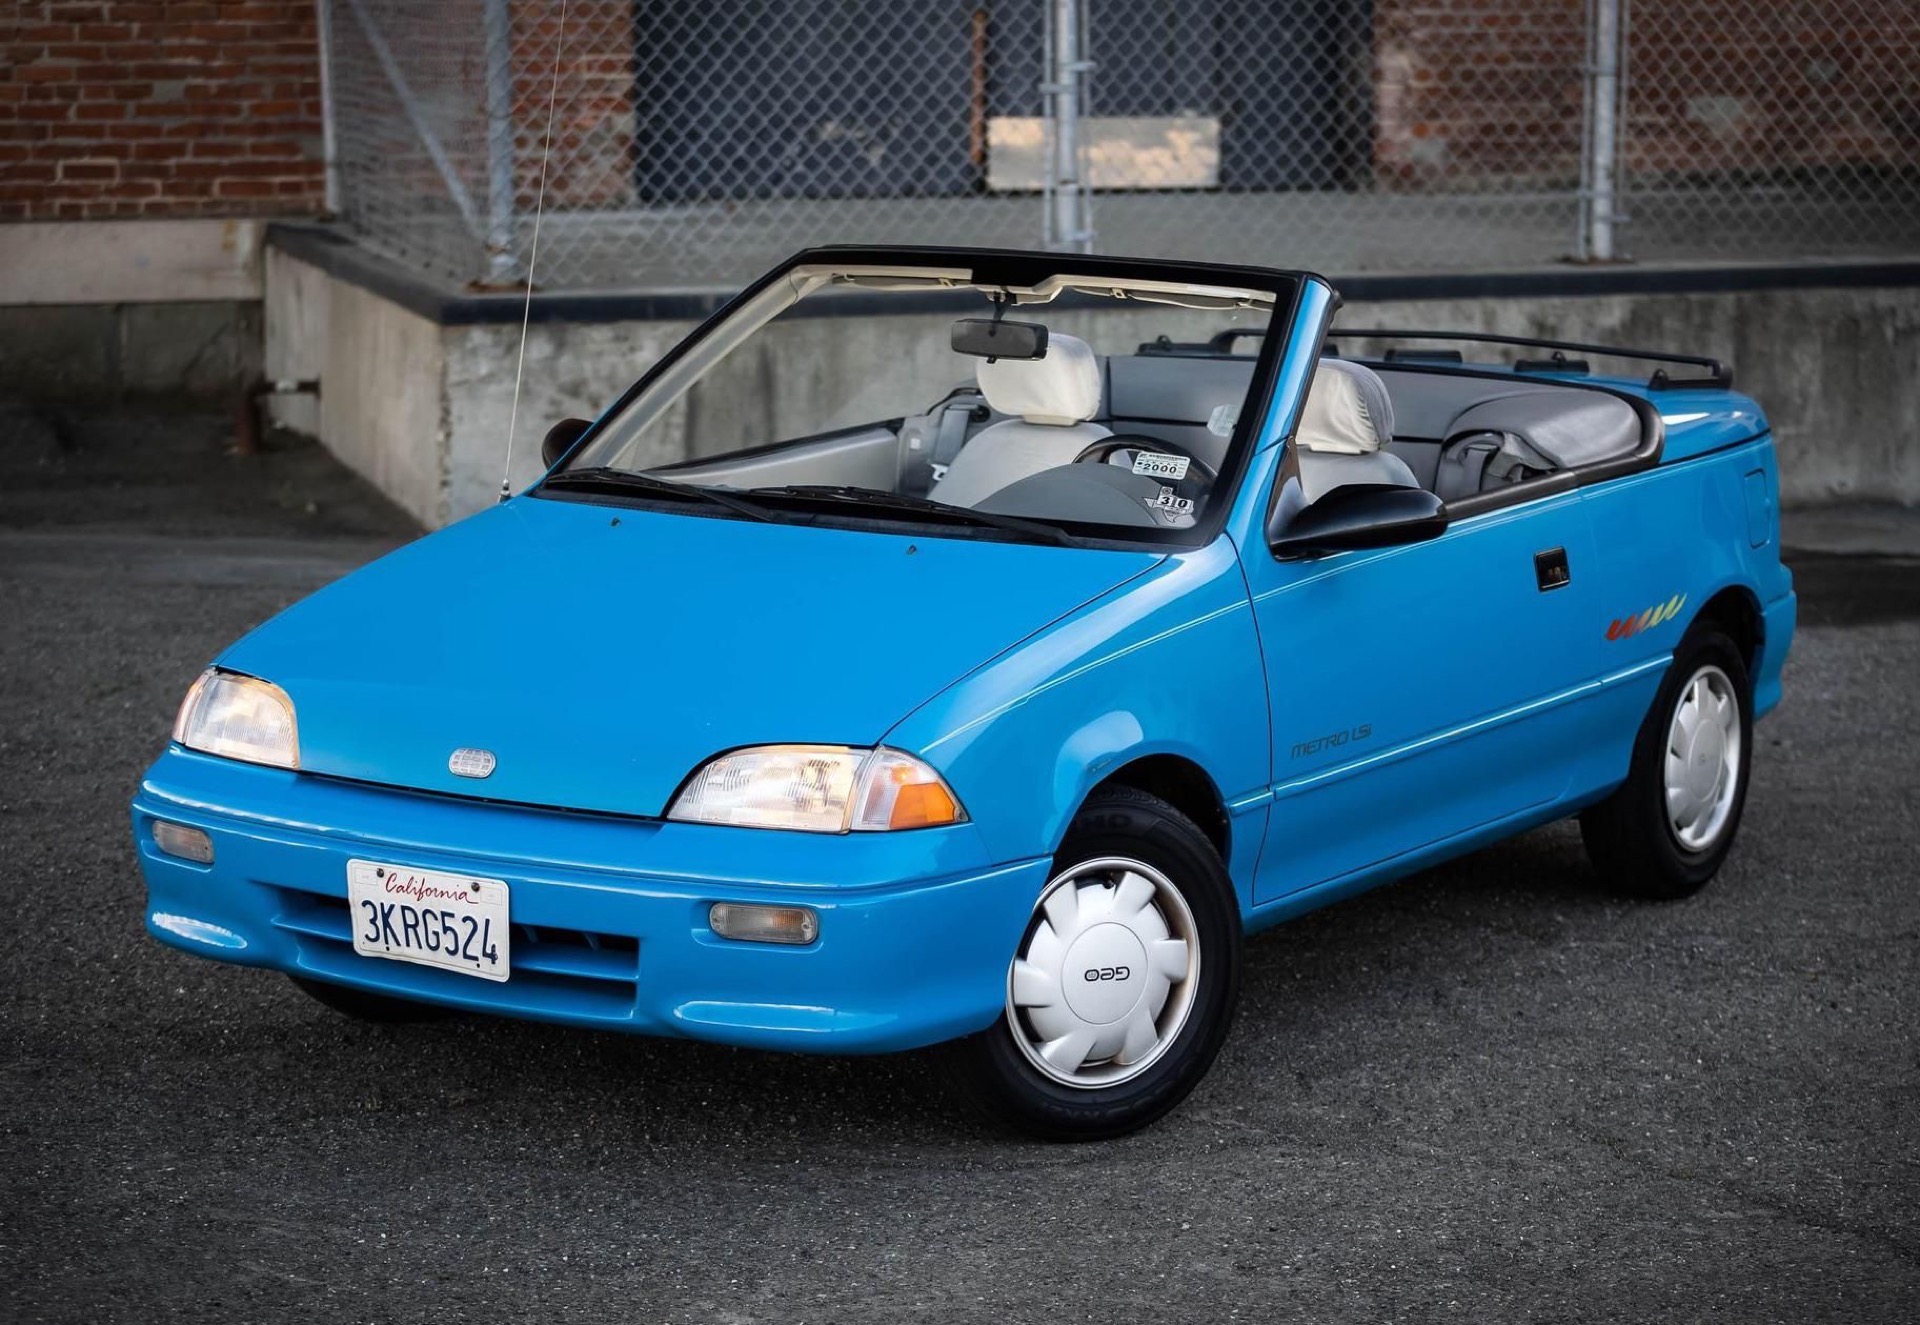 The Geo Metro Convertible Is A Laughably Mediocre Car From The '80s |  Carscoops